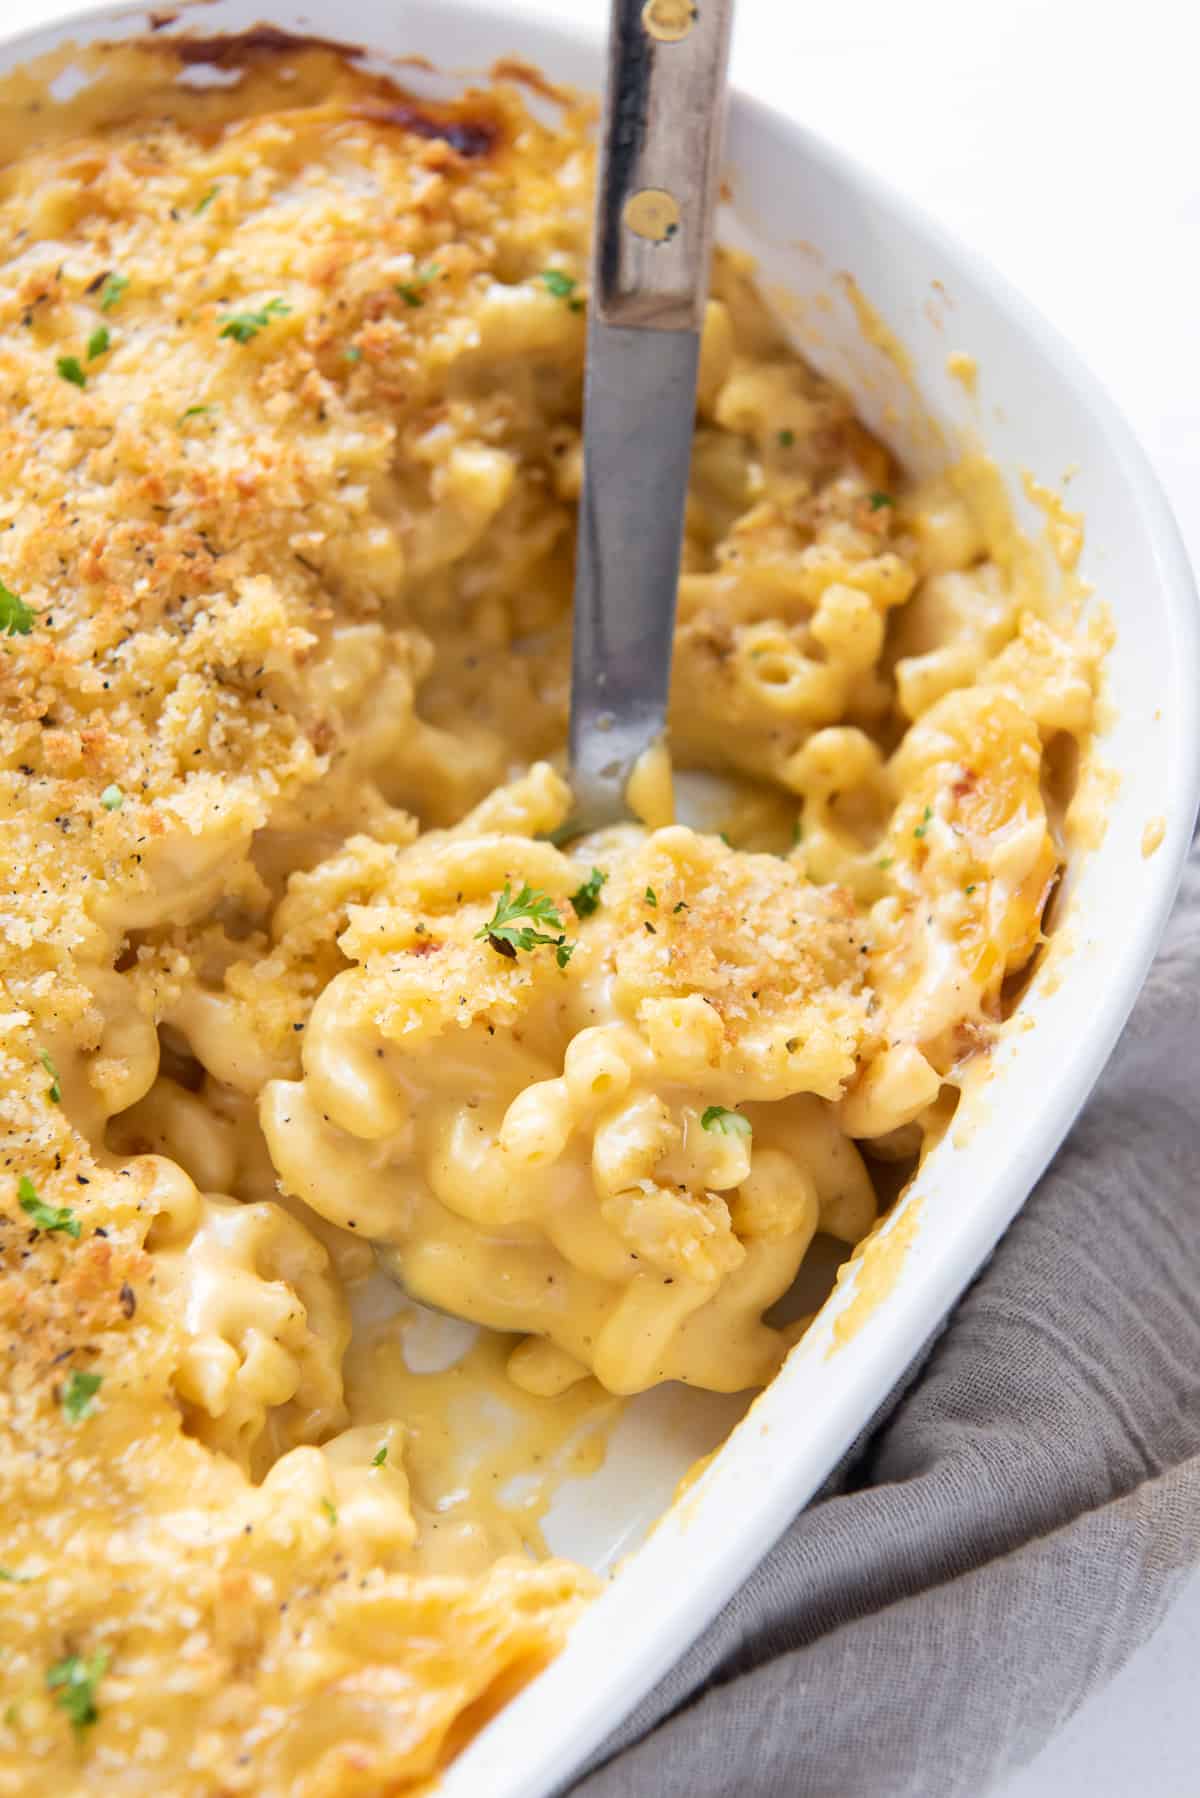 A spoon scoops macaroni and cheese from a baking dish.